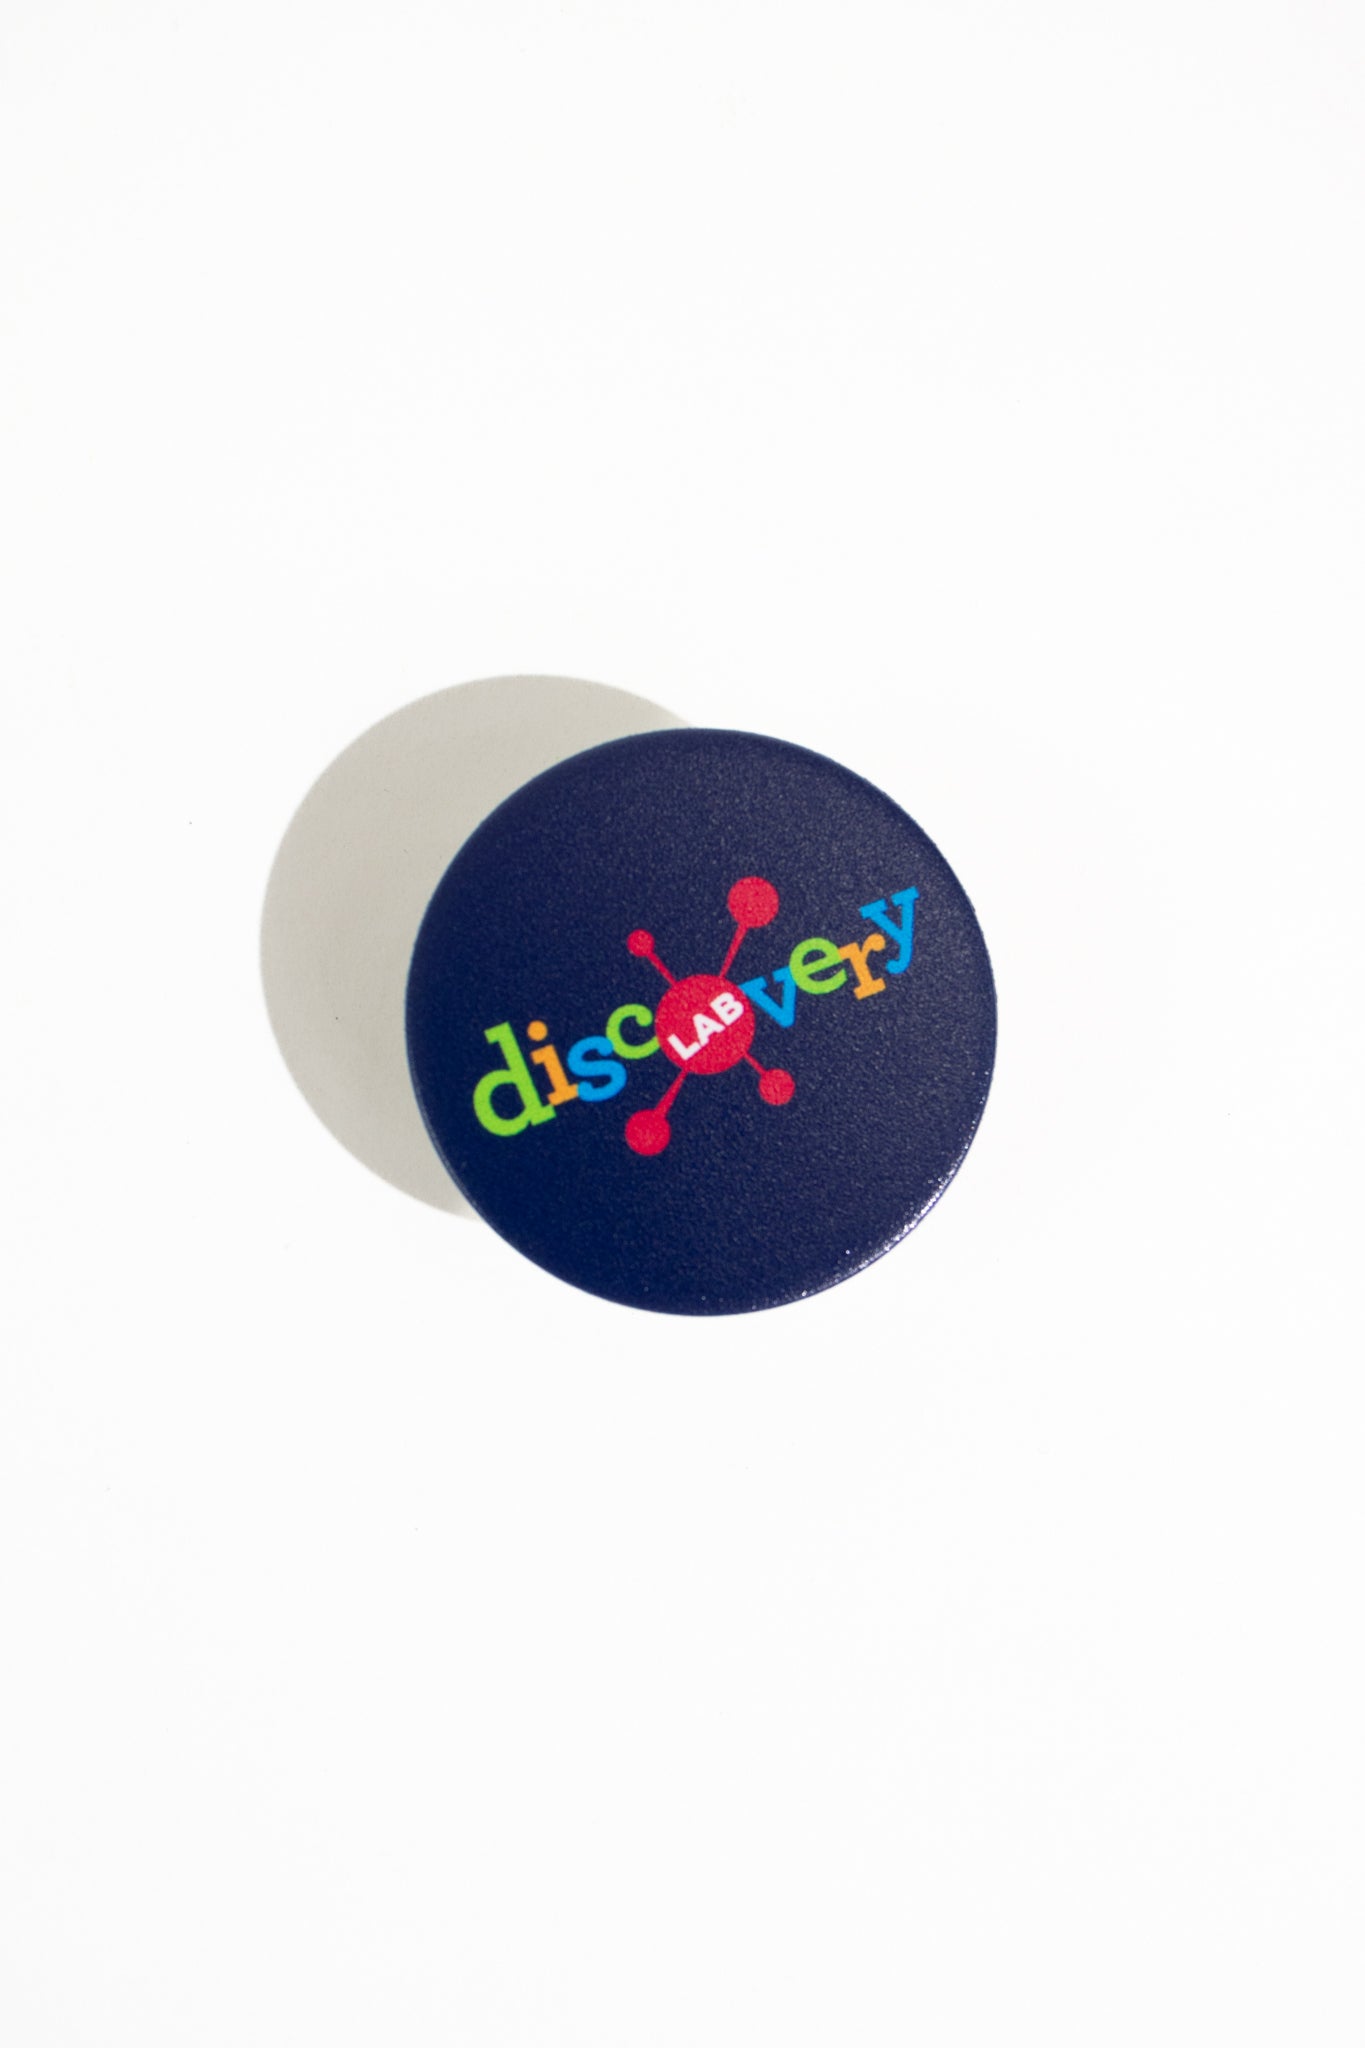 Discovery Lab Popsocket - Stemcell Science Shop